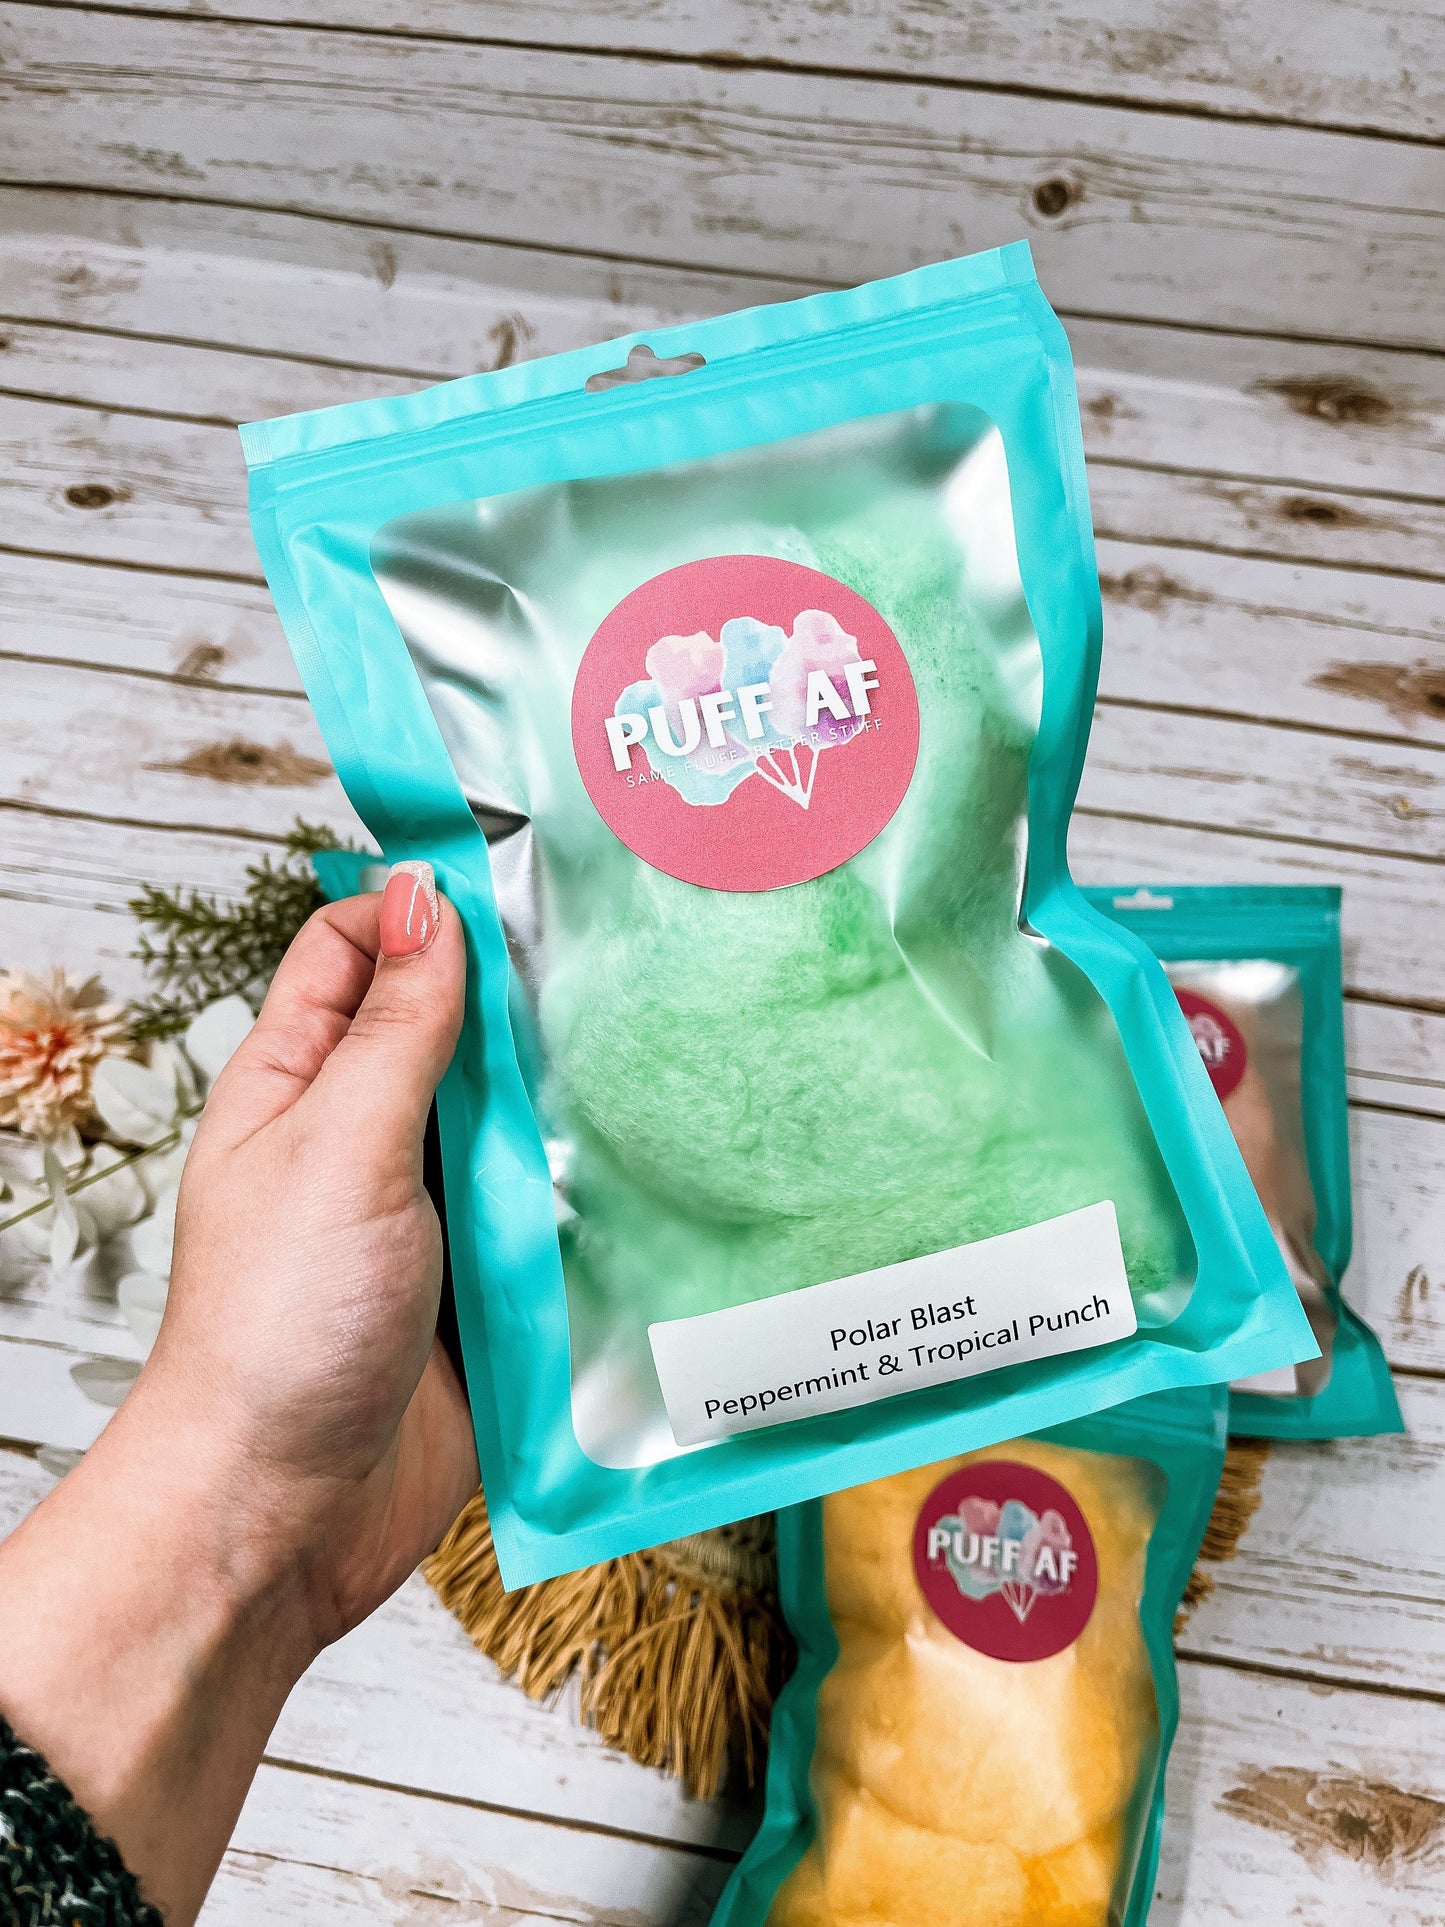 Puff Cotton Candy (AF - Allergy Free)